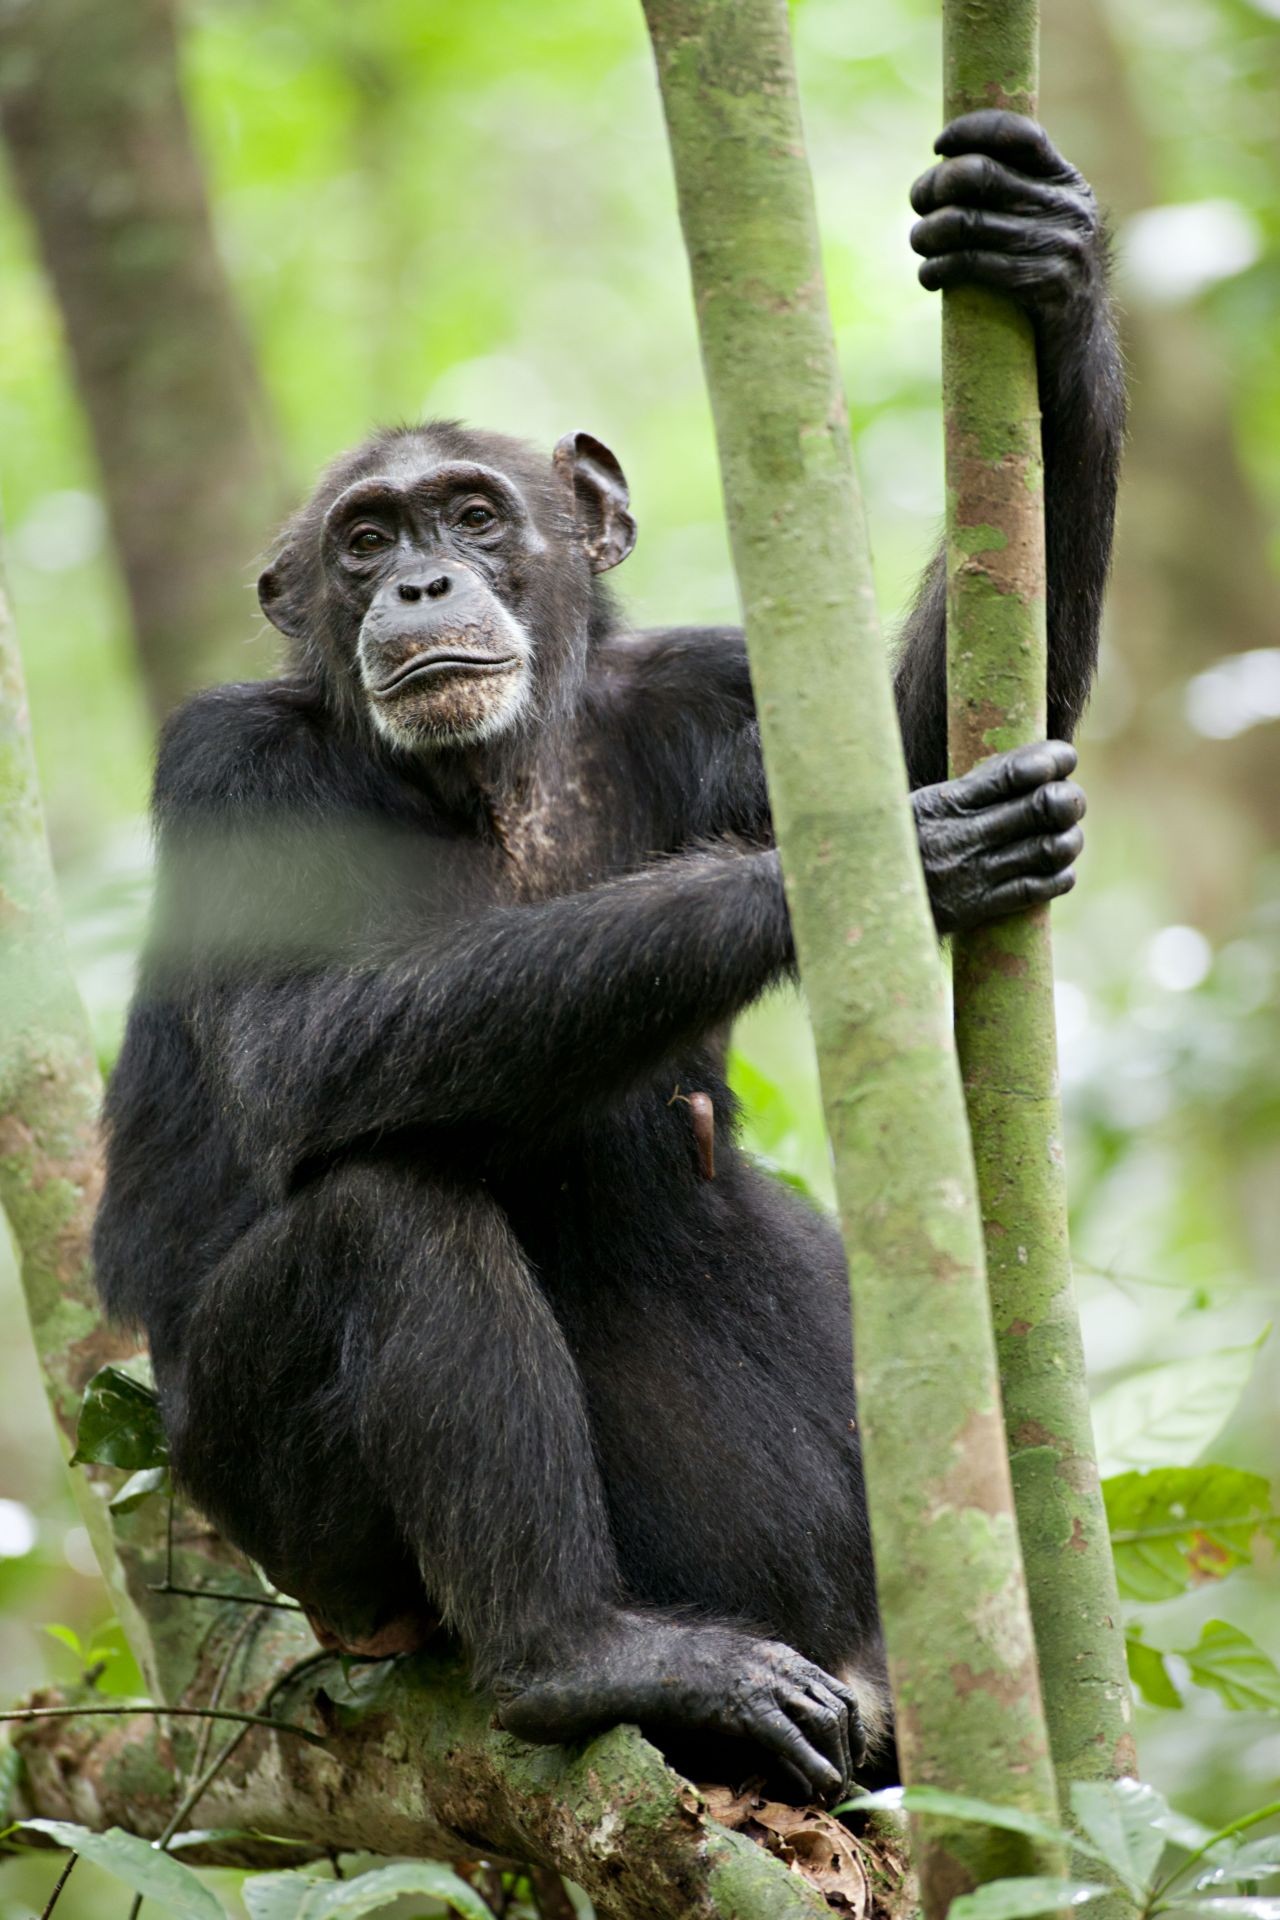 A scene from Walt Disney Pictures' Chimpanzee (2012). Photo credit by Martyn Colbeck.